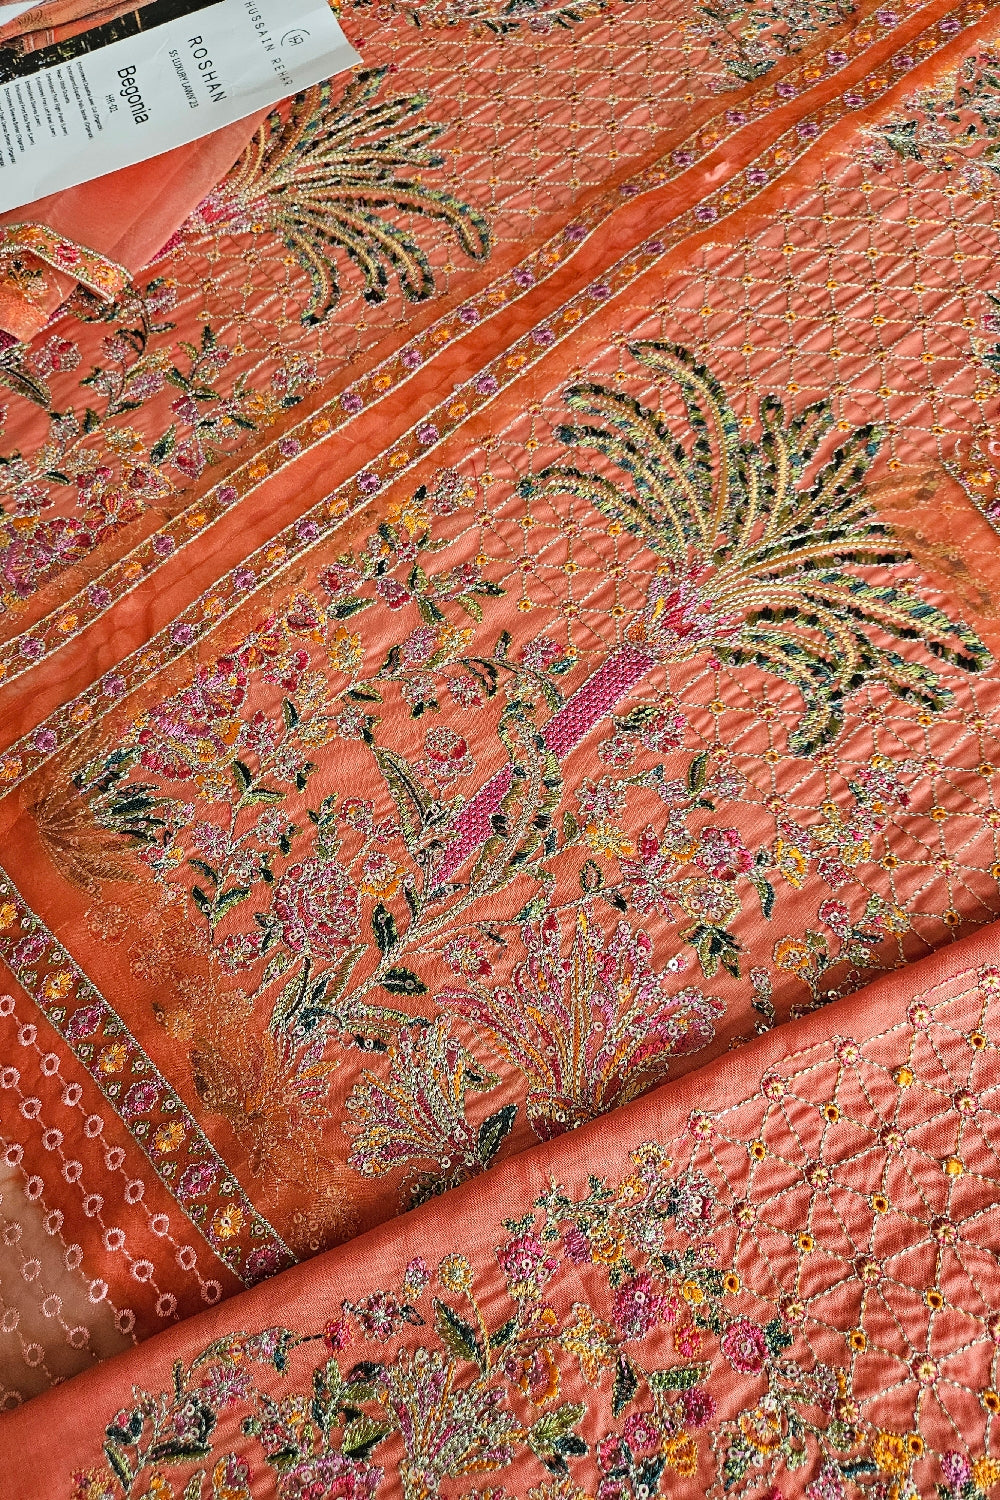 Heavy Embroidered Lawn Suit